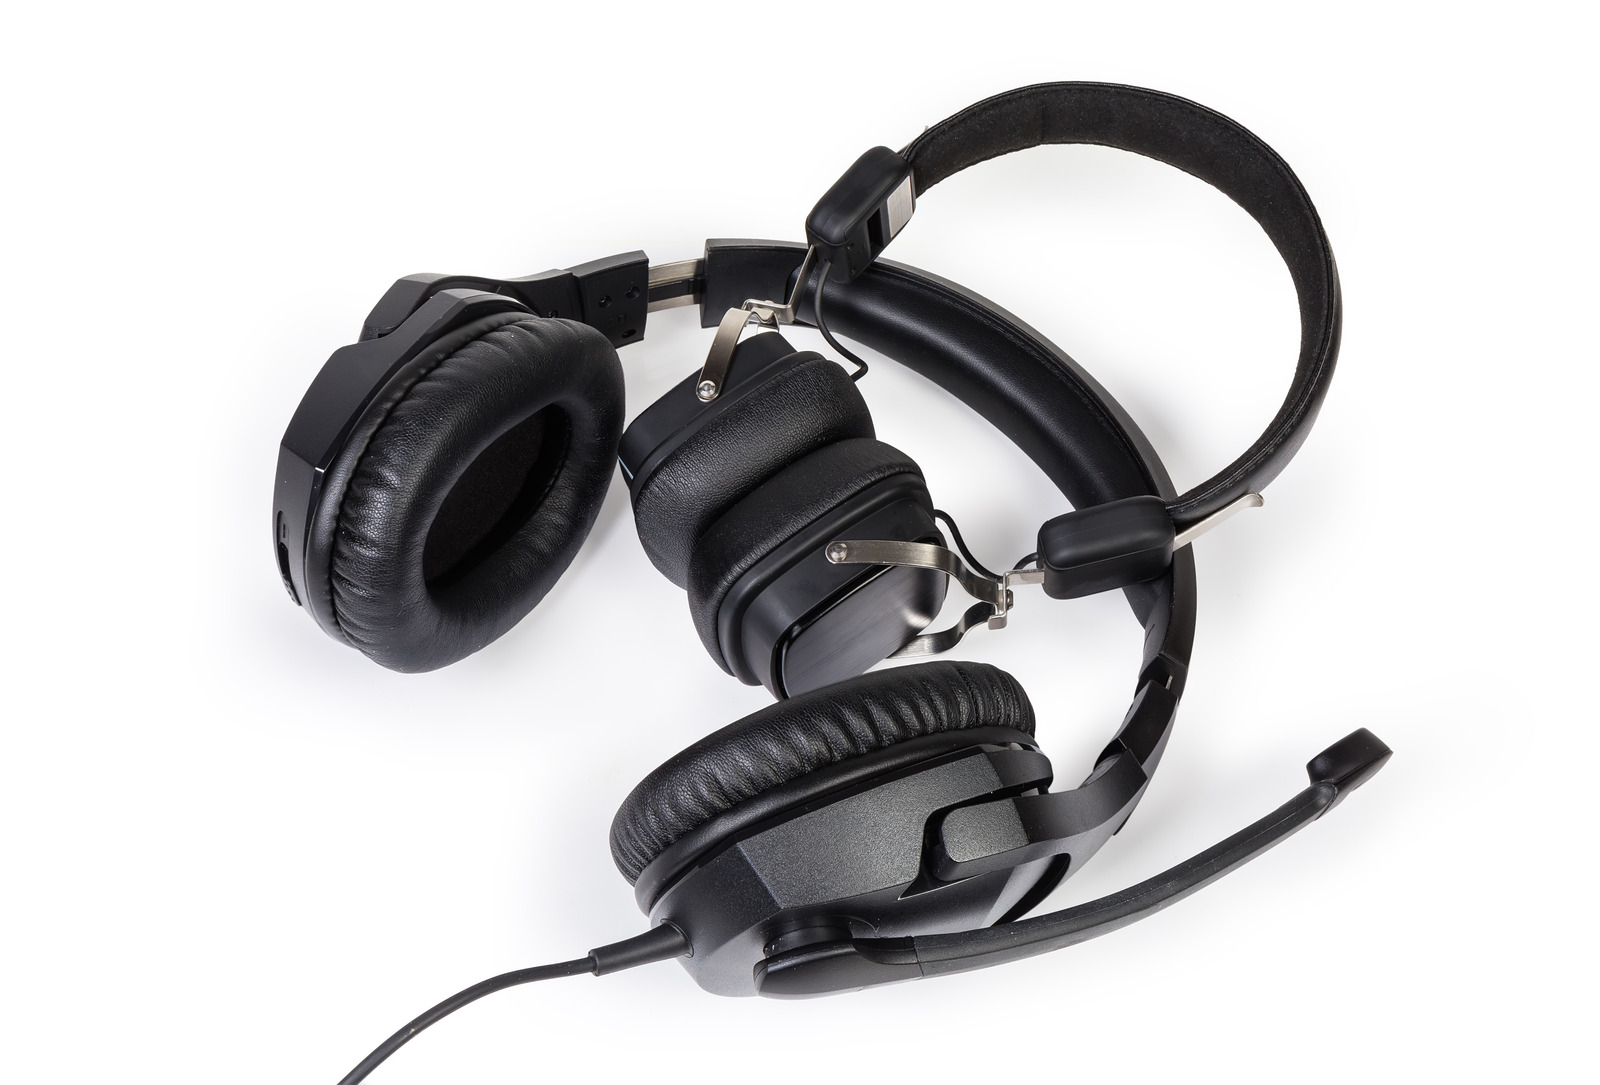 Wired high-fidelity headset with full size headphones and wireless ear speakers on a white background